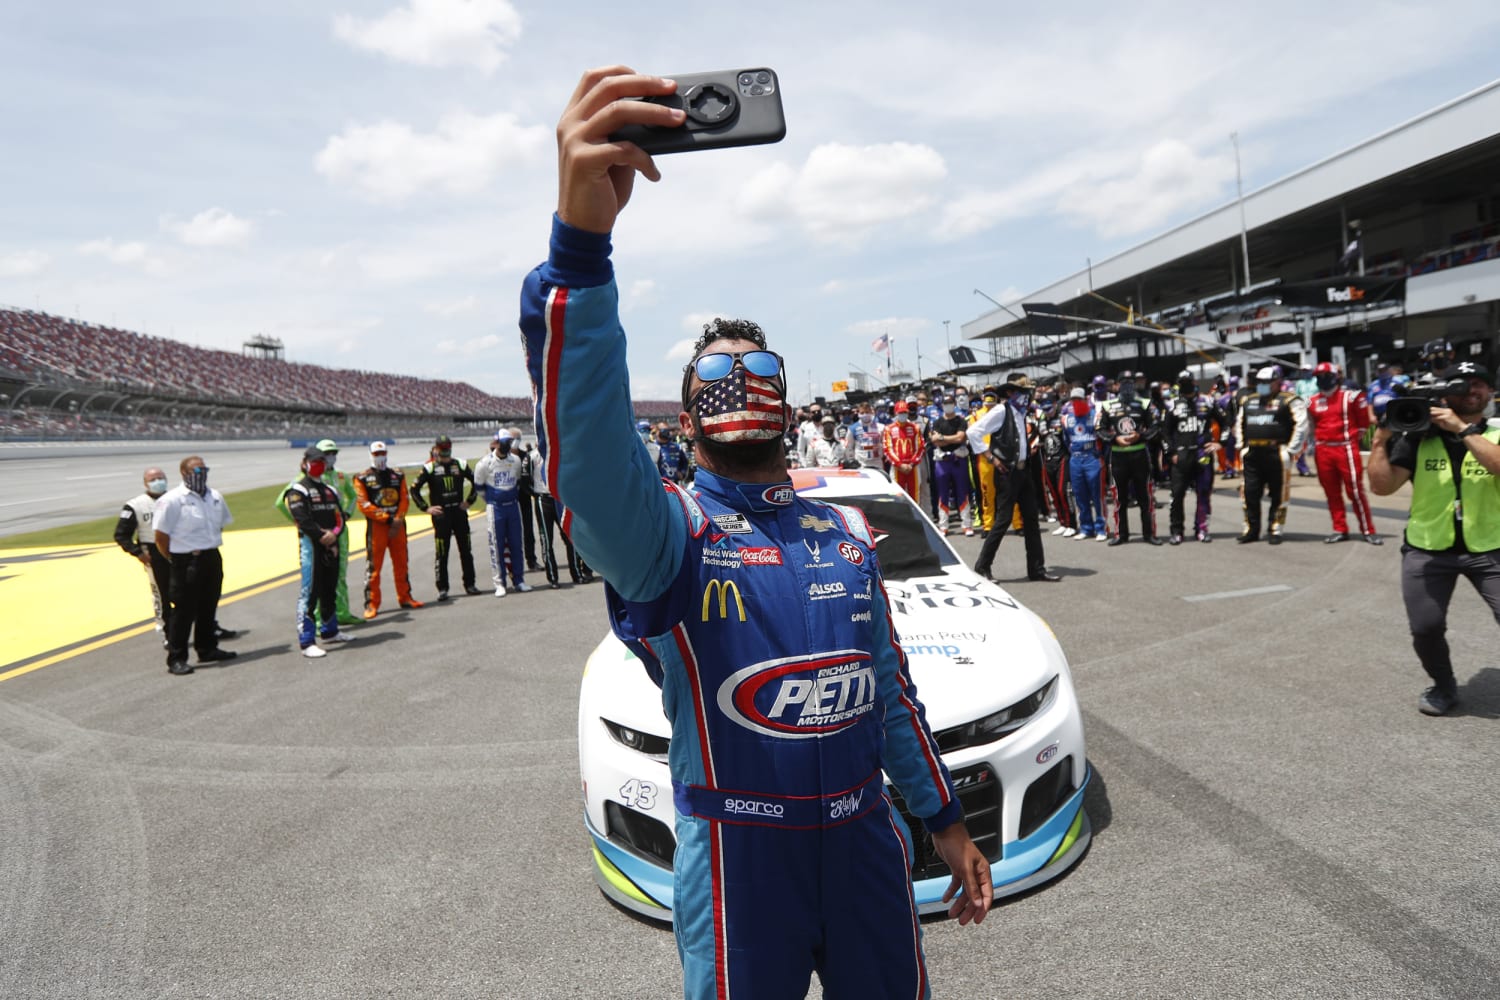 NASCAR drivers stand behind Bubba Wallace after noose incident